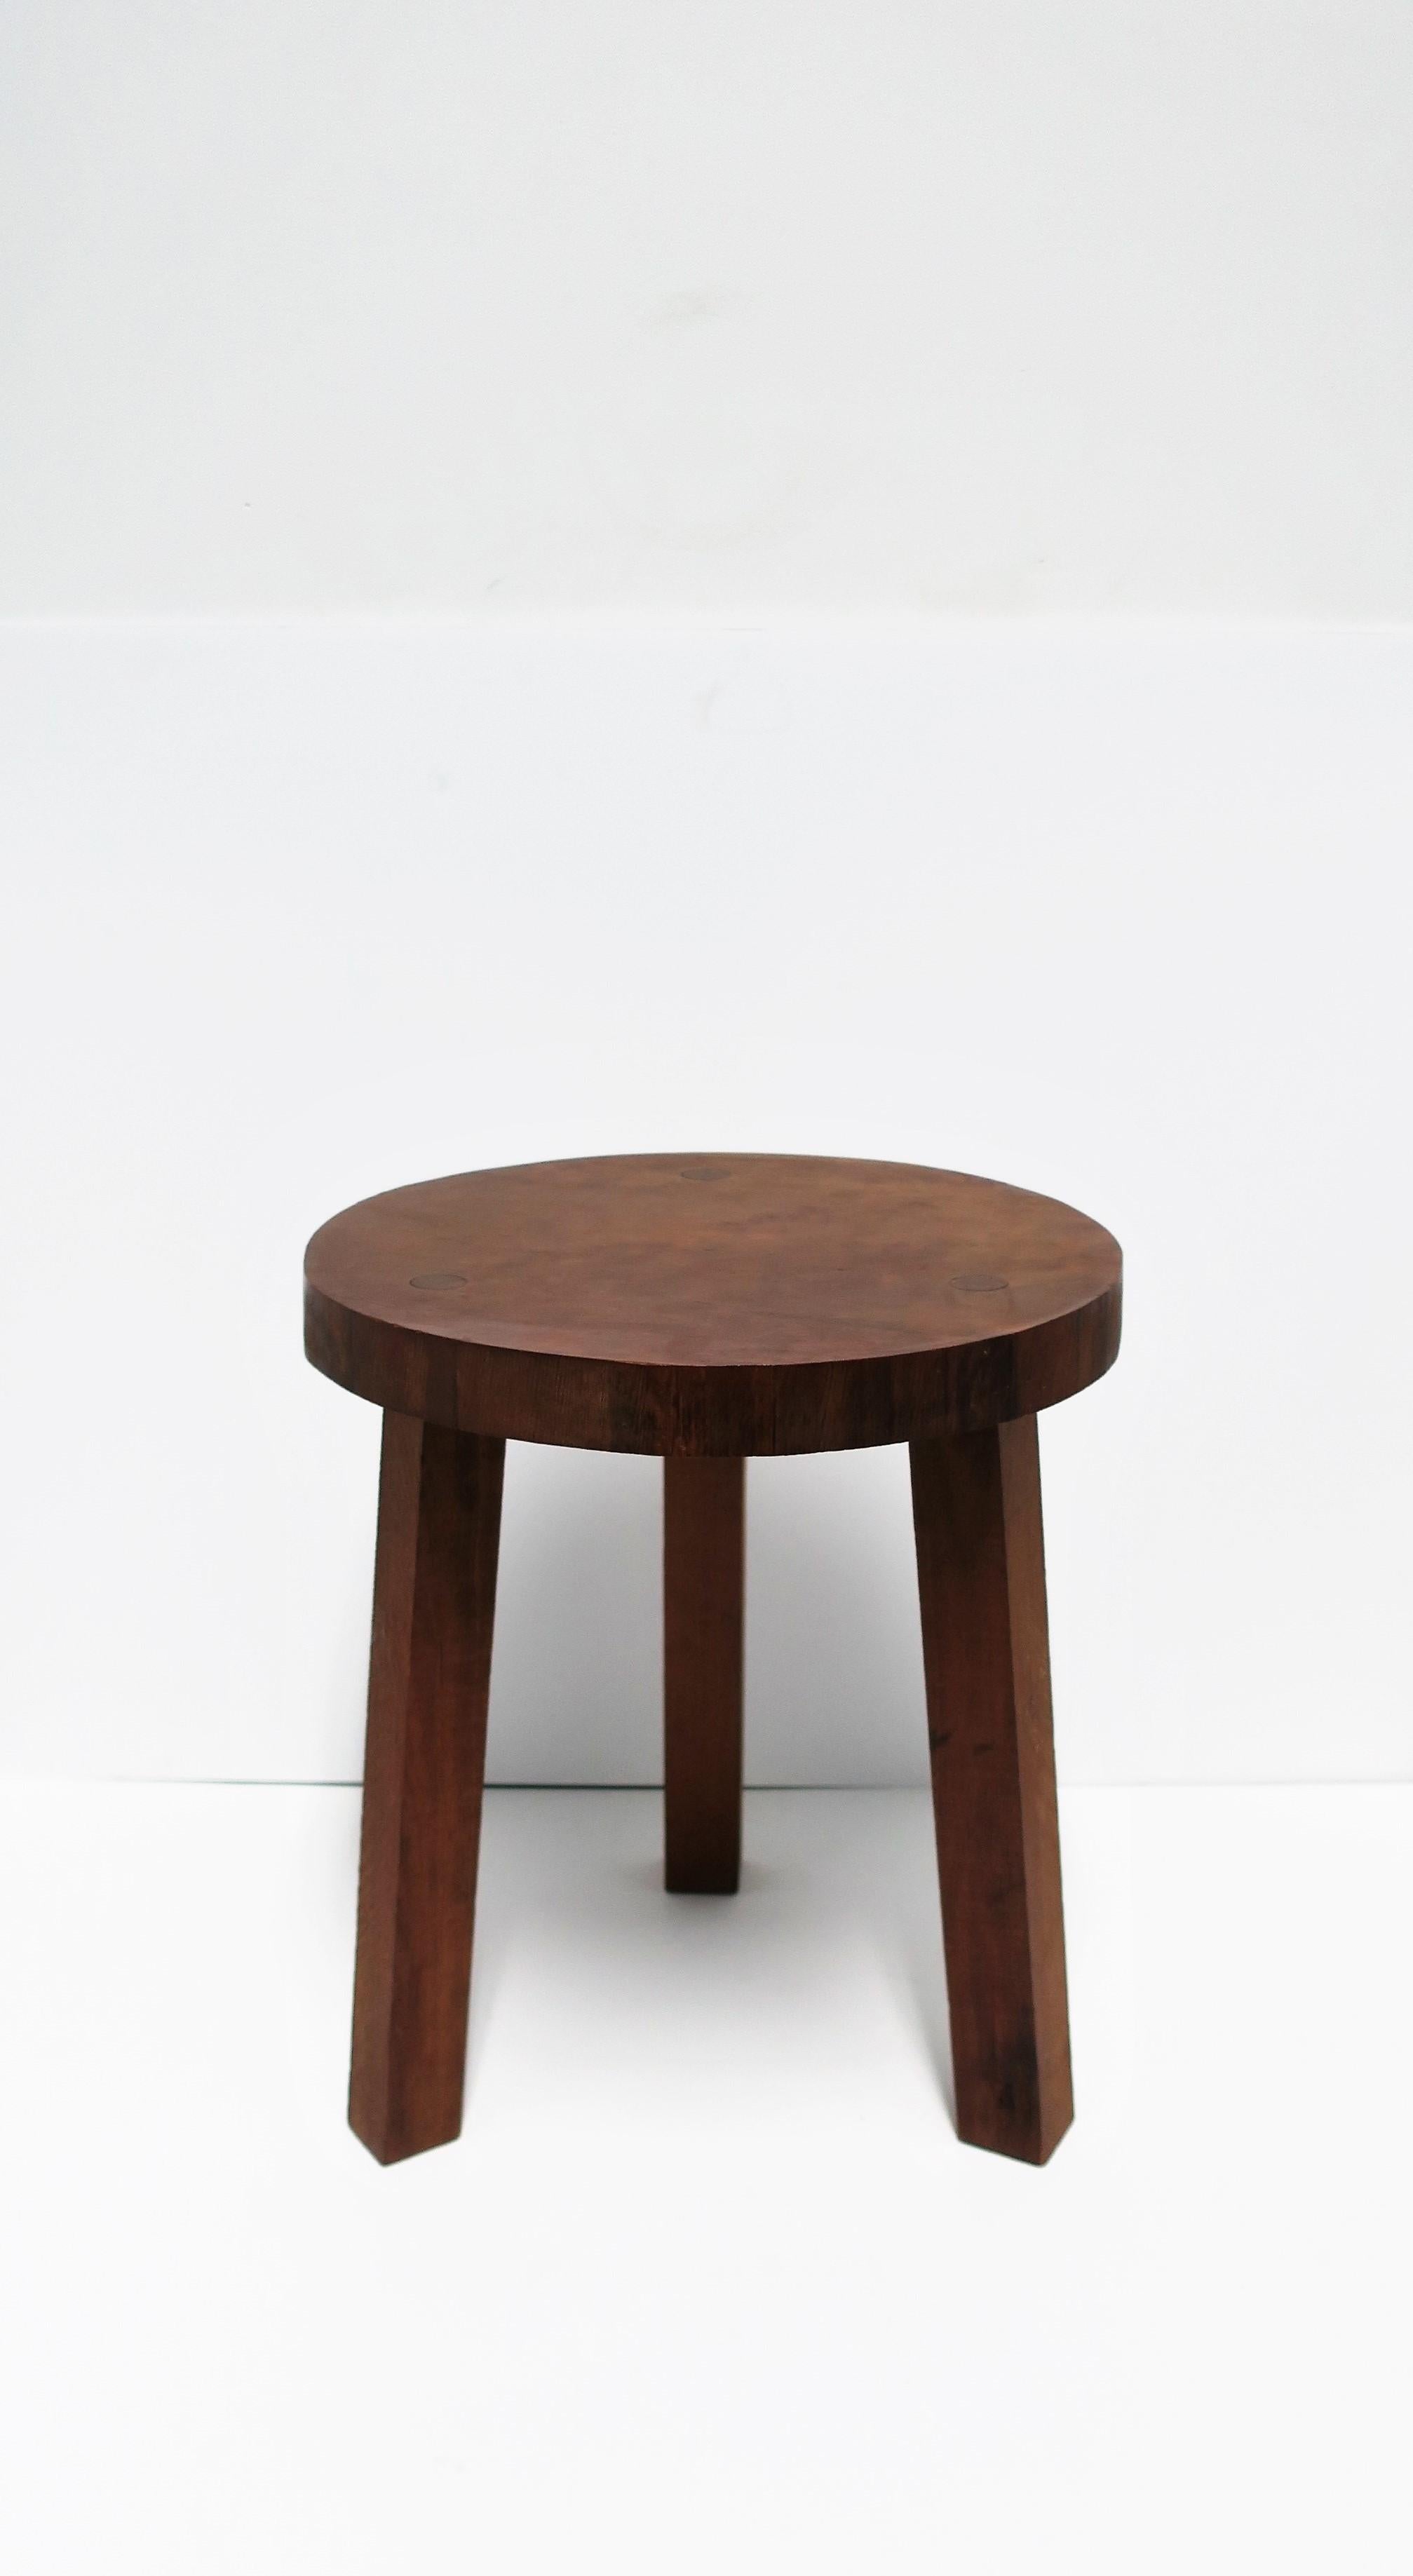 A beautiful round wood stool or side table with tri-pod leg base, in the Brutalist style. Large wood screw detail on top/seat area as shown in images. Quality wood. Top seat wood thickness measures: 1.38